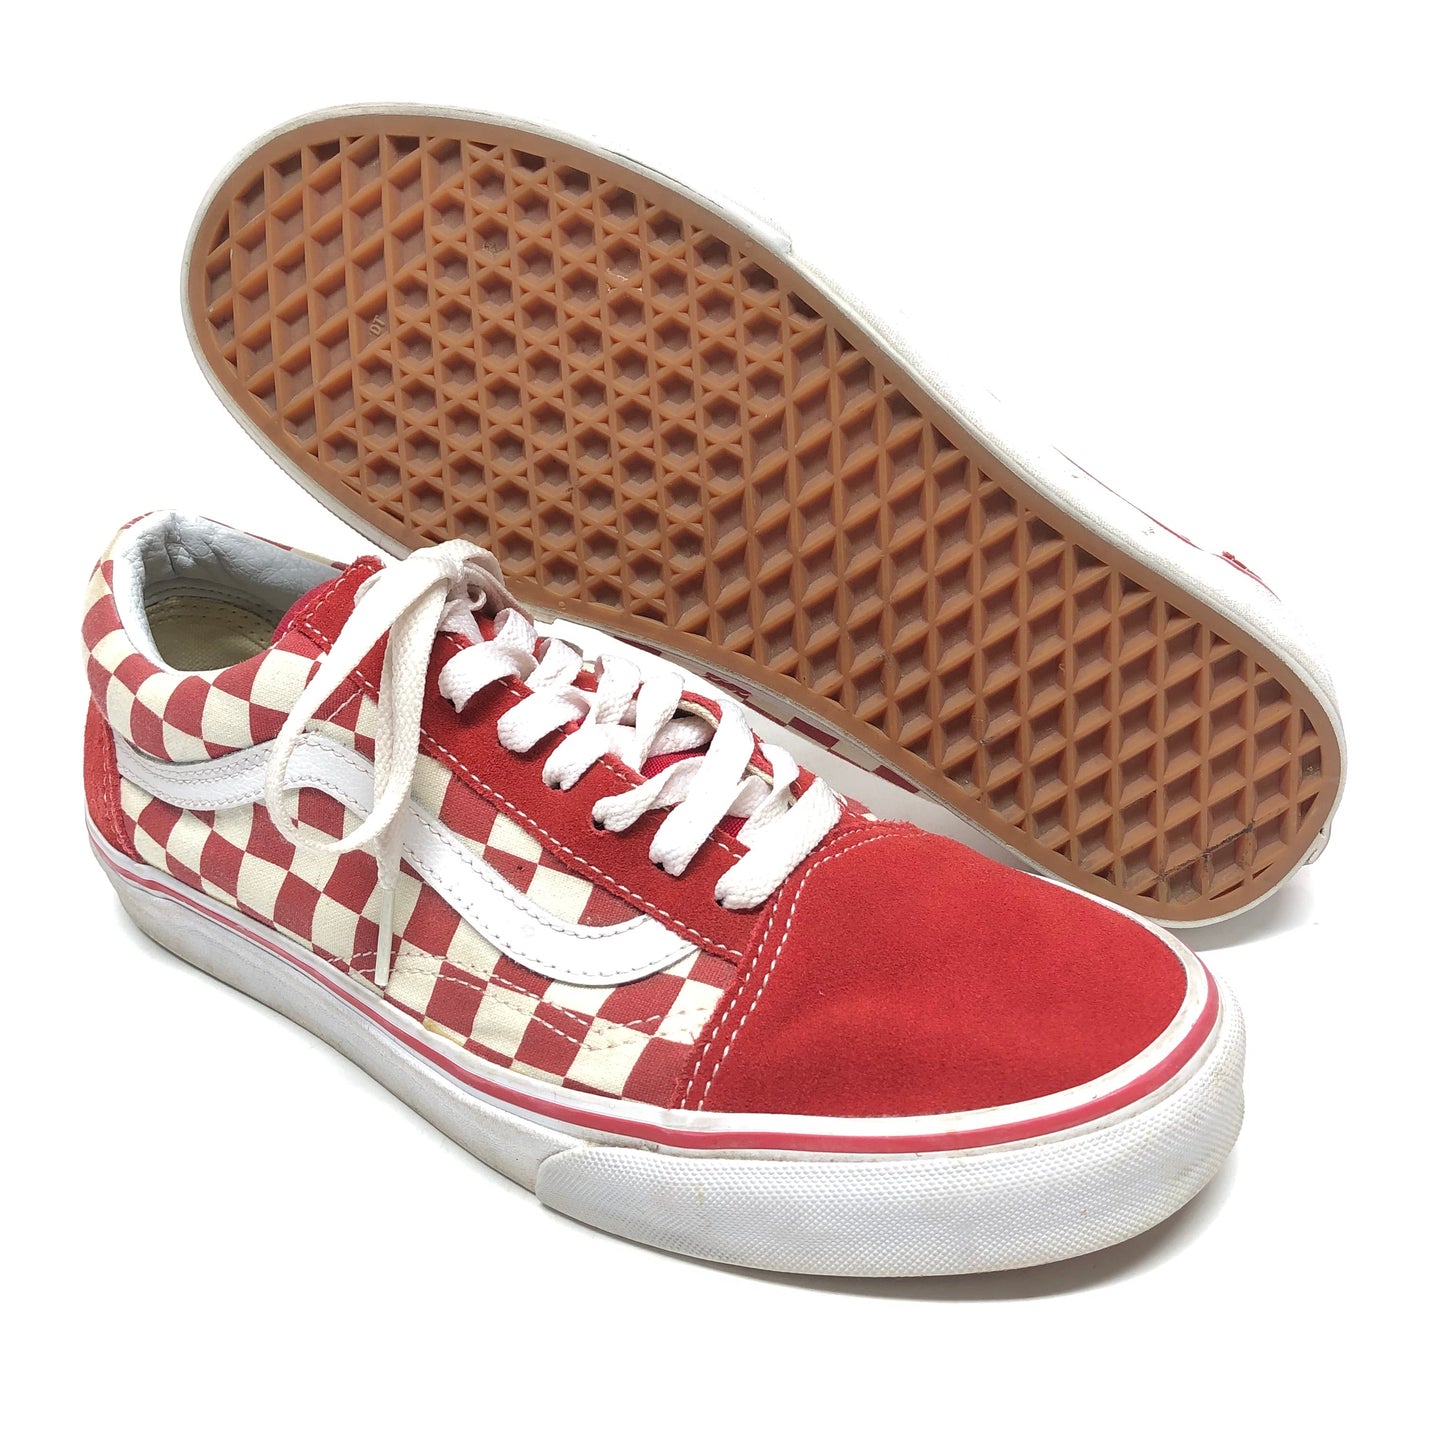 Red & White Shoes Sneakers Vans, Size 10